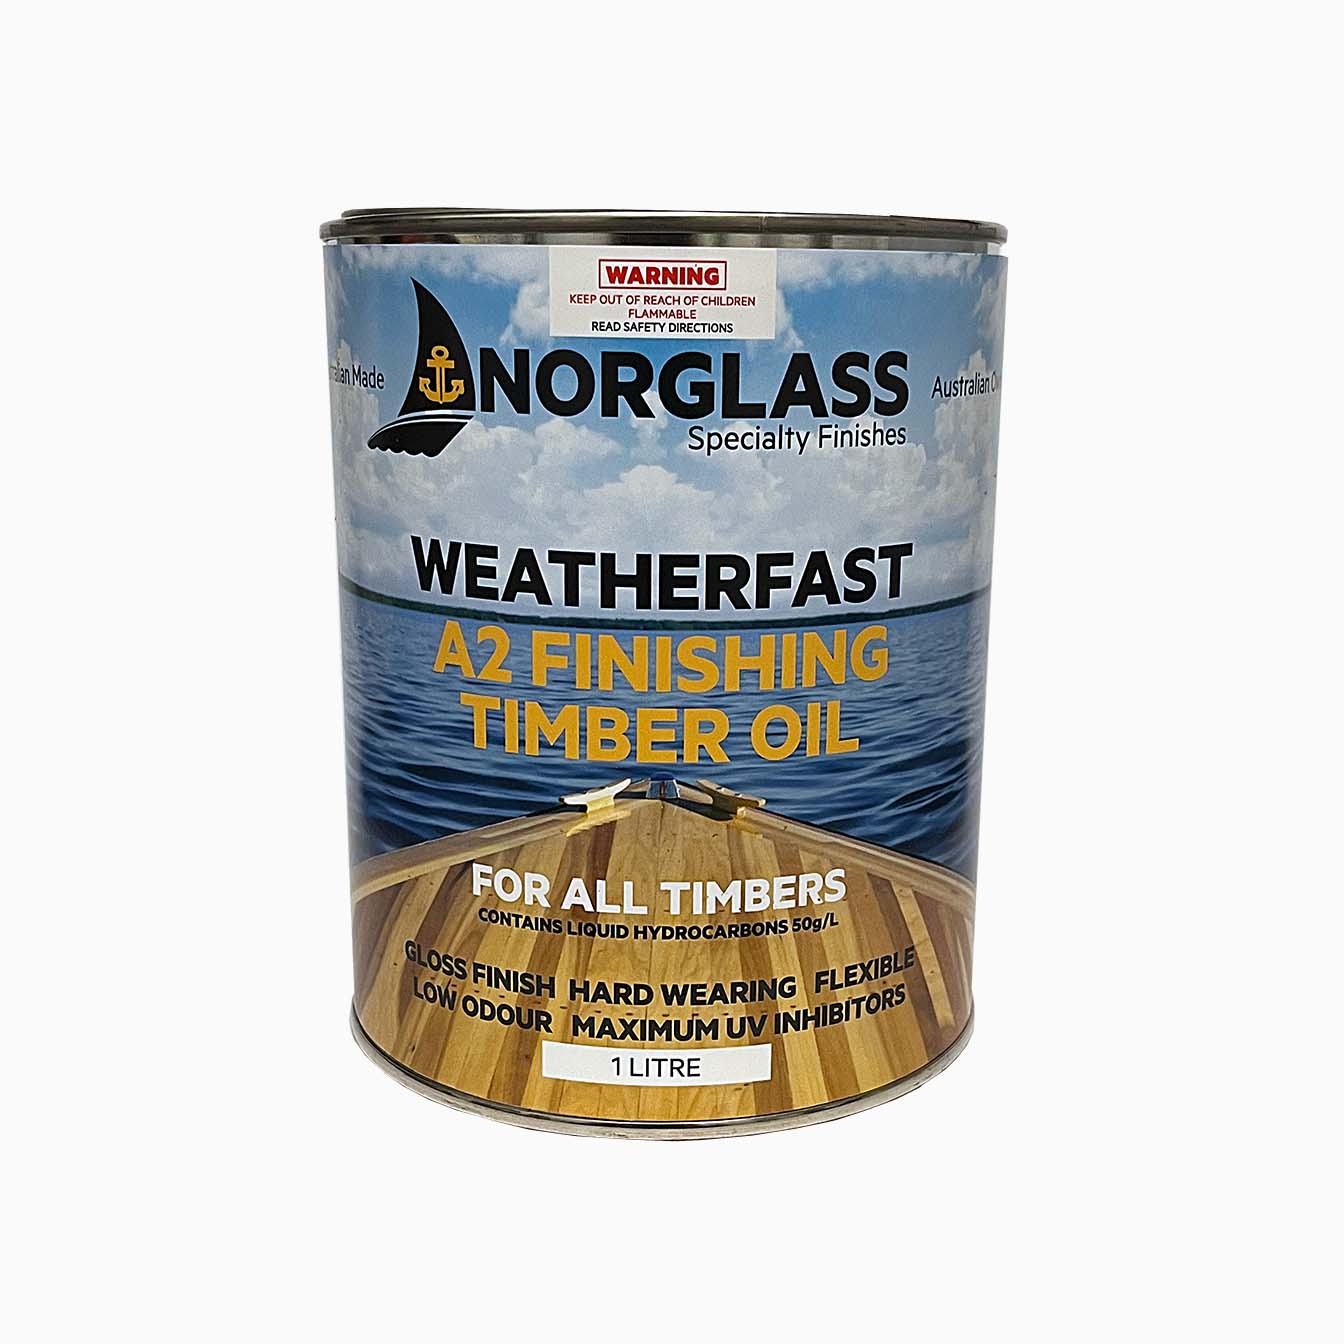 A2 Finishing Timber Oil